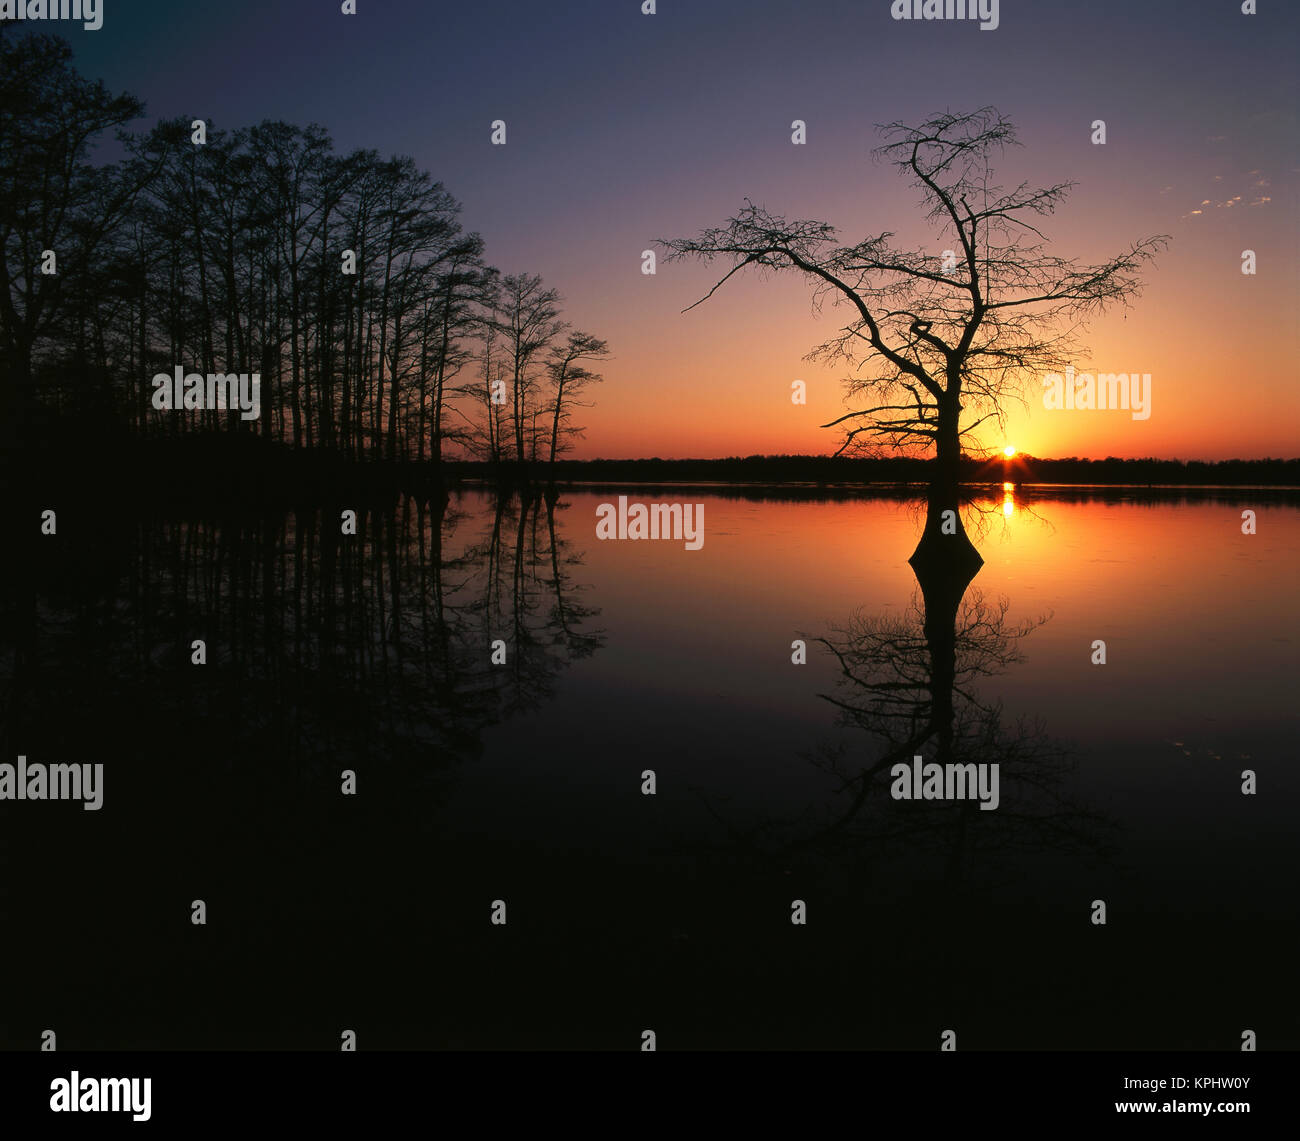 USA, Tennessee, Reelfoot National Wildlife Refuge, Silhouetted Bald Cypress trees reflected in Reelfoot Lake at sunset (Large format sizes available) Stock Photo